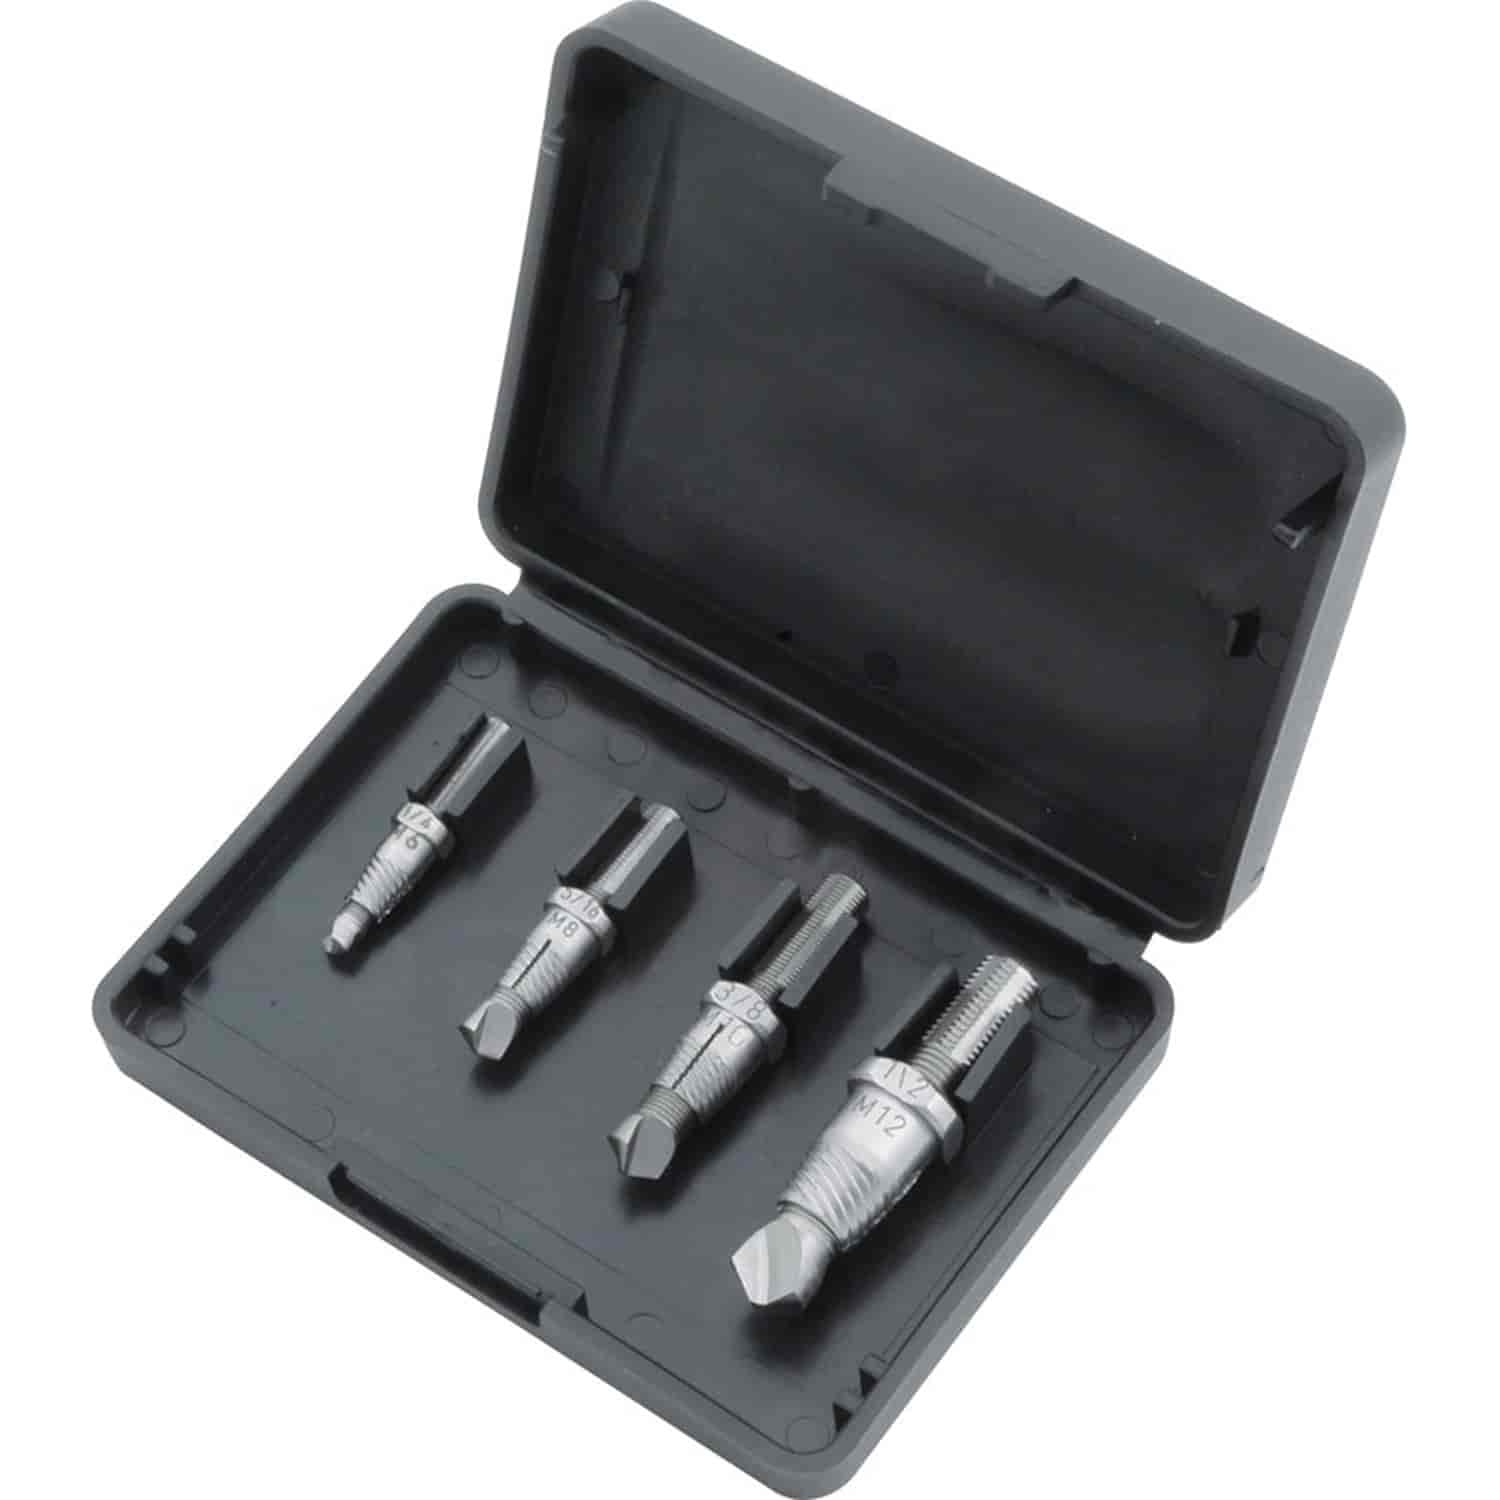 Bolt Extractor Kit Includes: 1/4" (M6), 5/16" (M8), 3/8" (M10), 1/2" (M12)